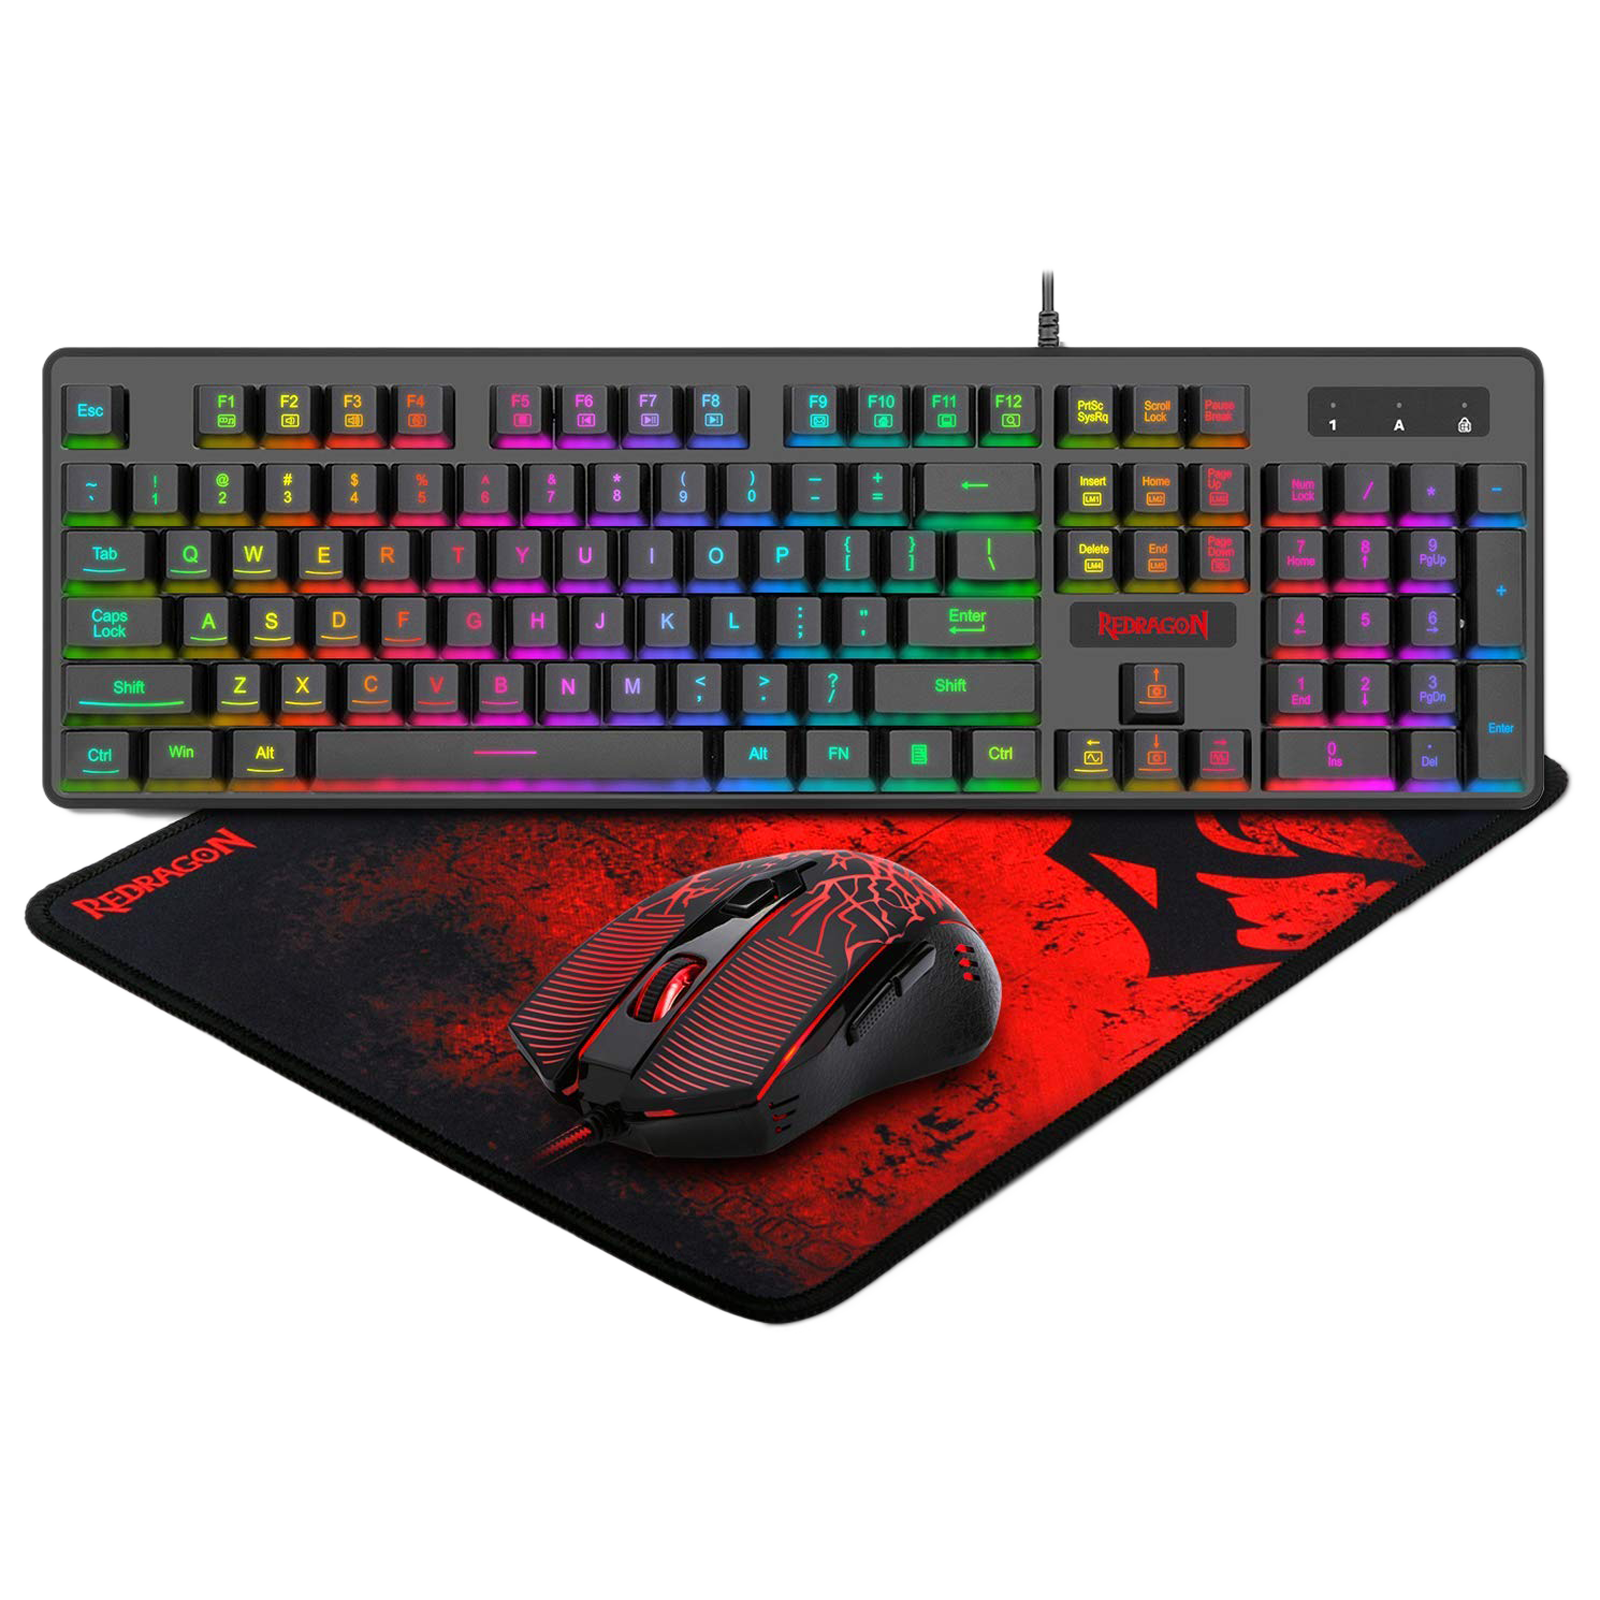 Redragon S107 3 IN 1 Wired Gaming Keyboard & Mouse Combo (Backlit Technology, Black)